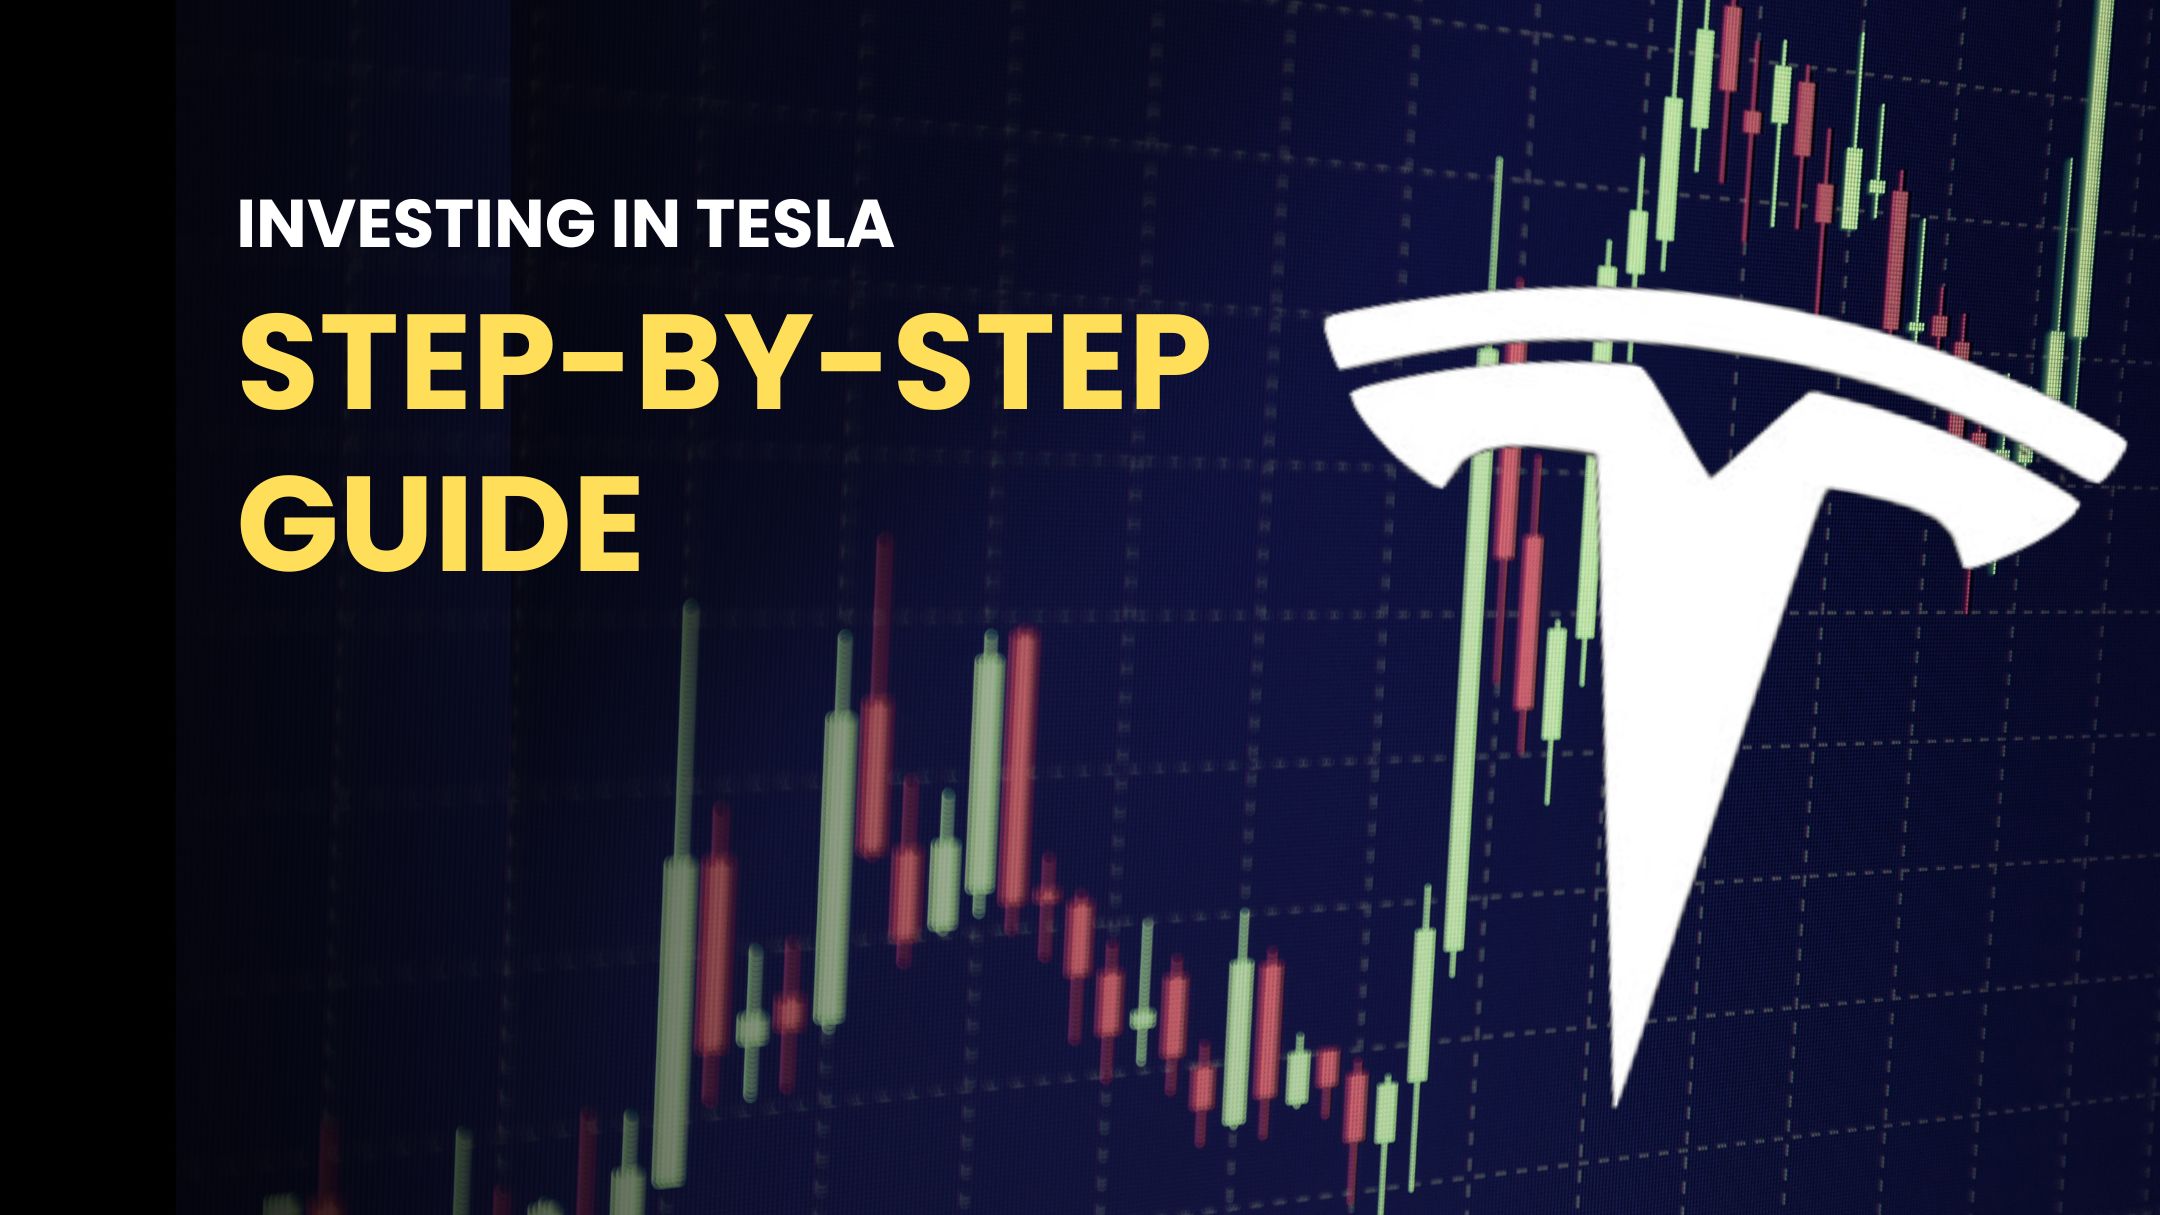 How-to invest in Tesla Step-by-Step Guide 202310-001 (Revised)